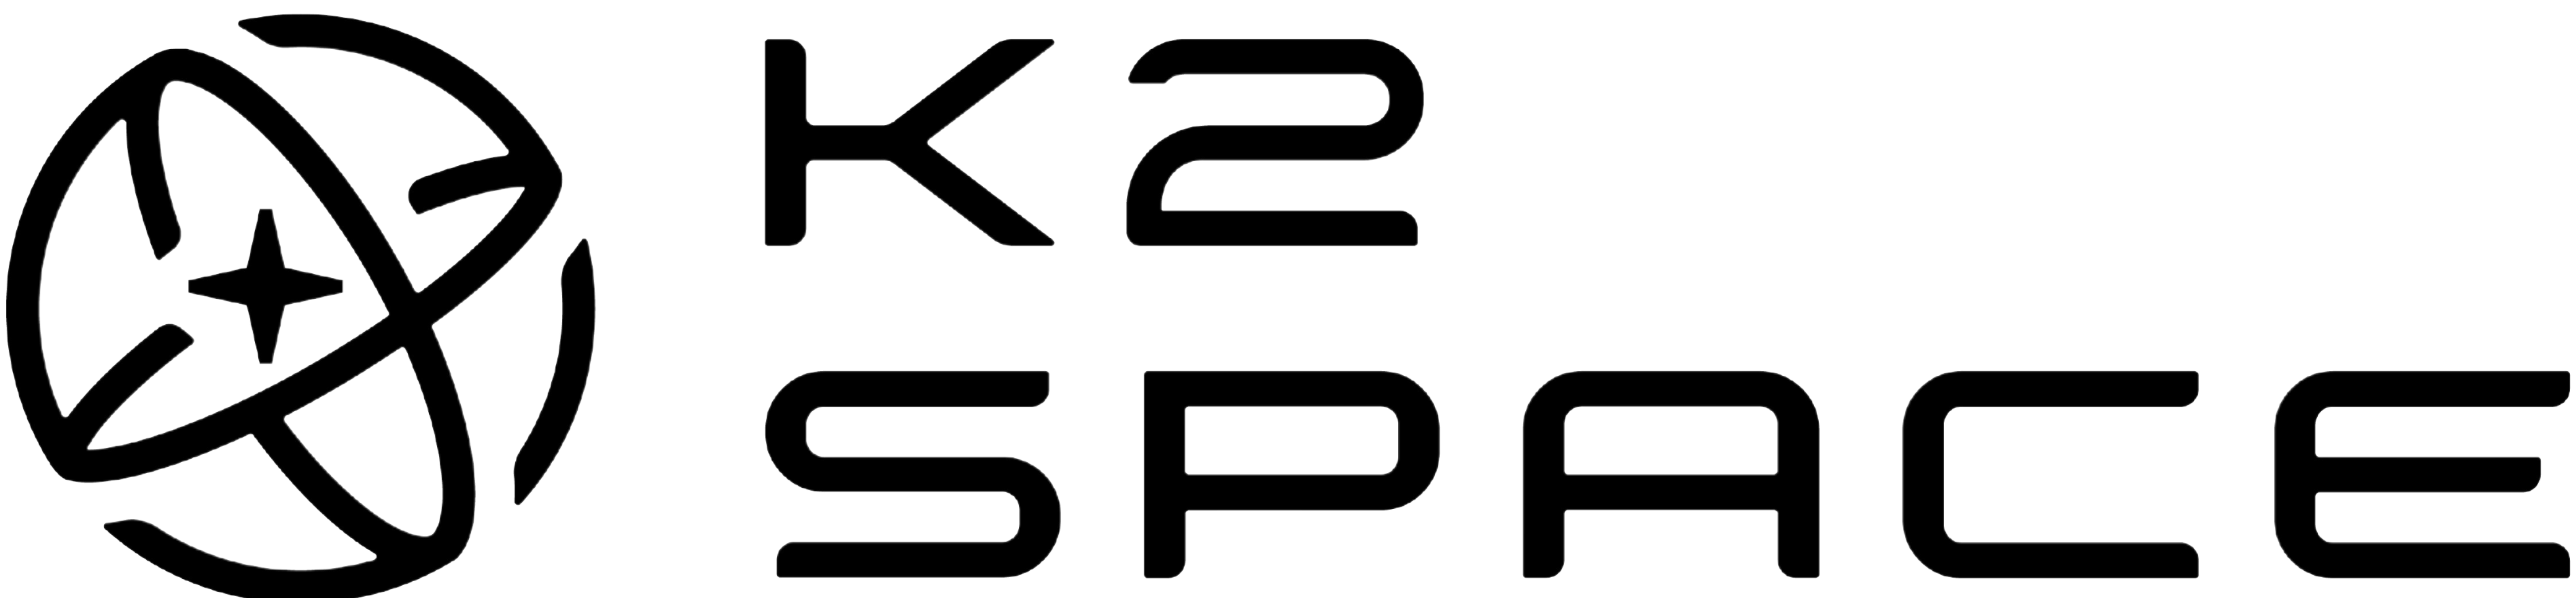 K2 Space